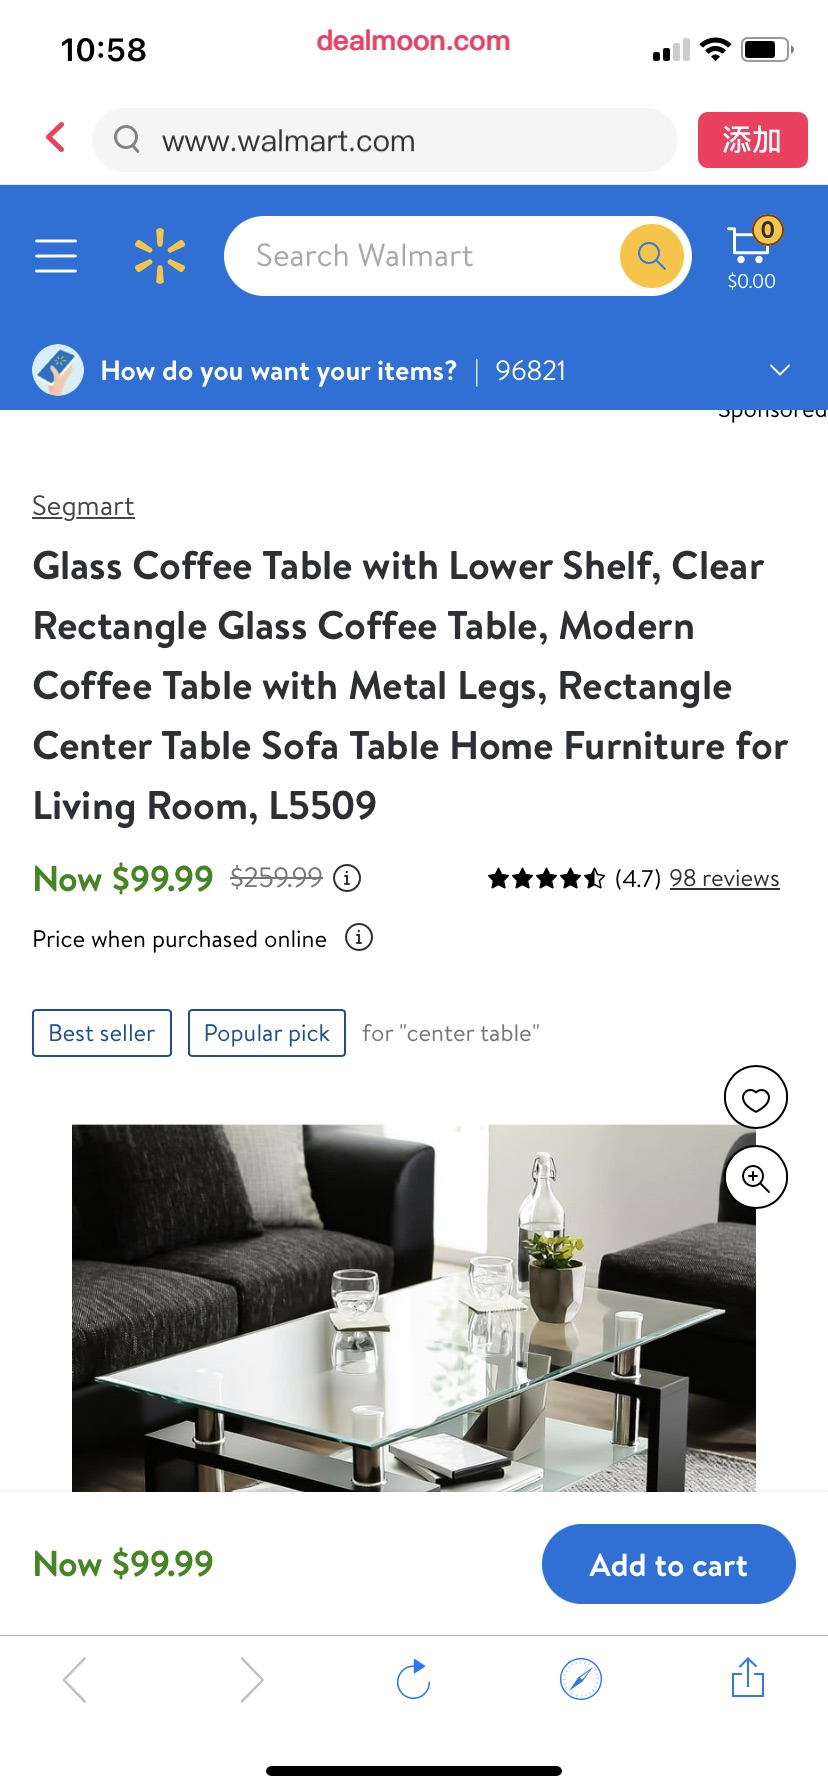 Glass Coffee Table with Lower Shelf, Clear Rectangle Glass Coffee Table, Modern Coffee Table with Metal Legs, Rectangle Center Table Sofa Table Home Furniture for Living Room, L5509 - 玻璃咖啡桌